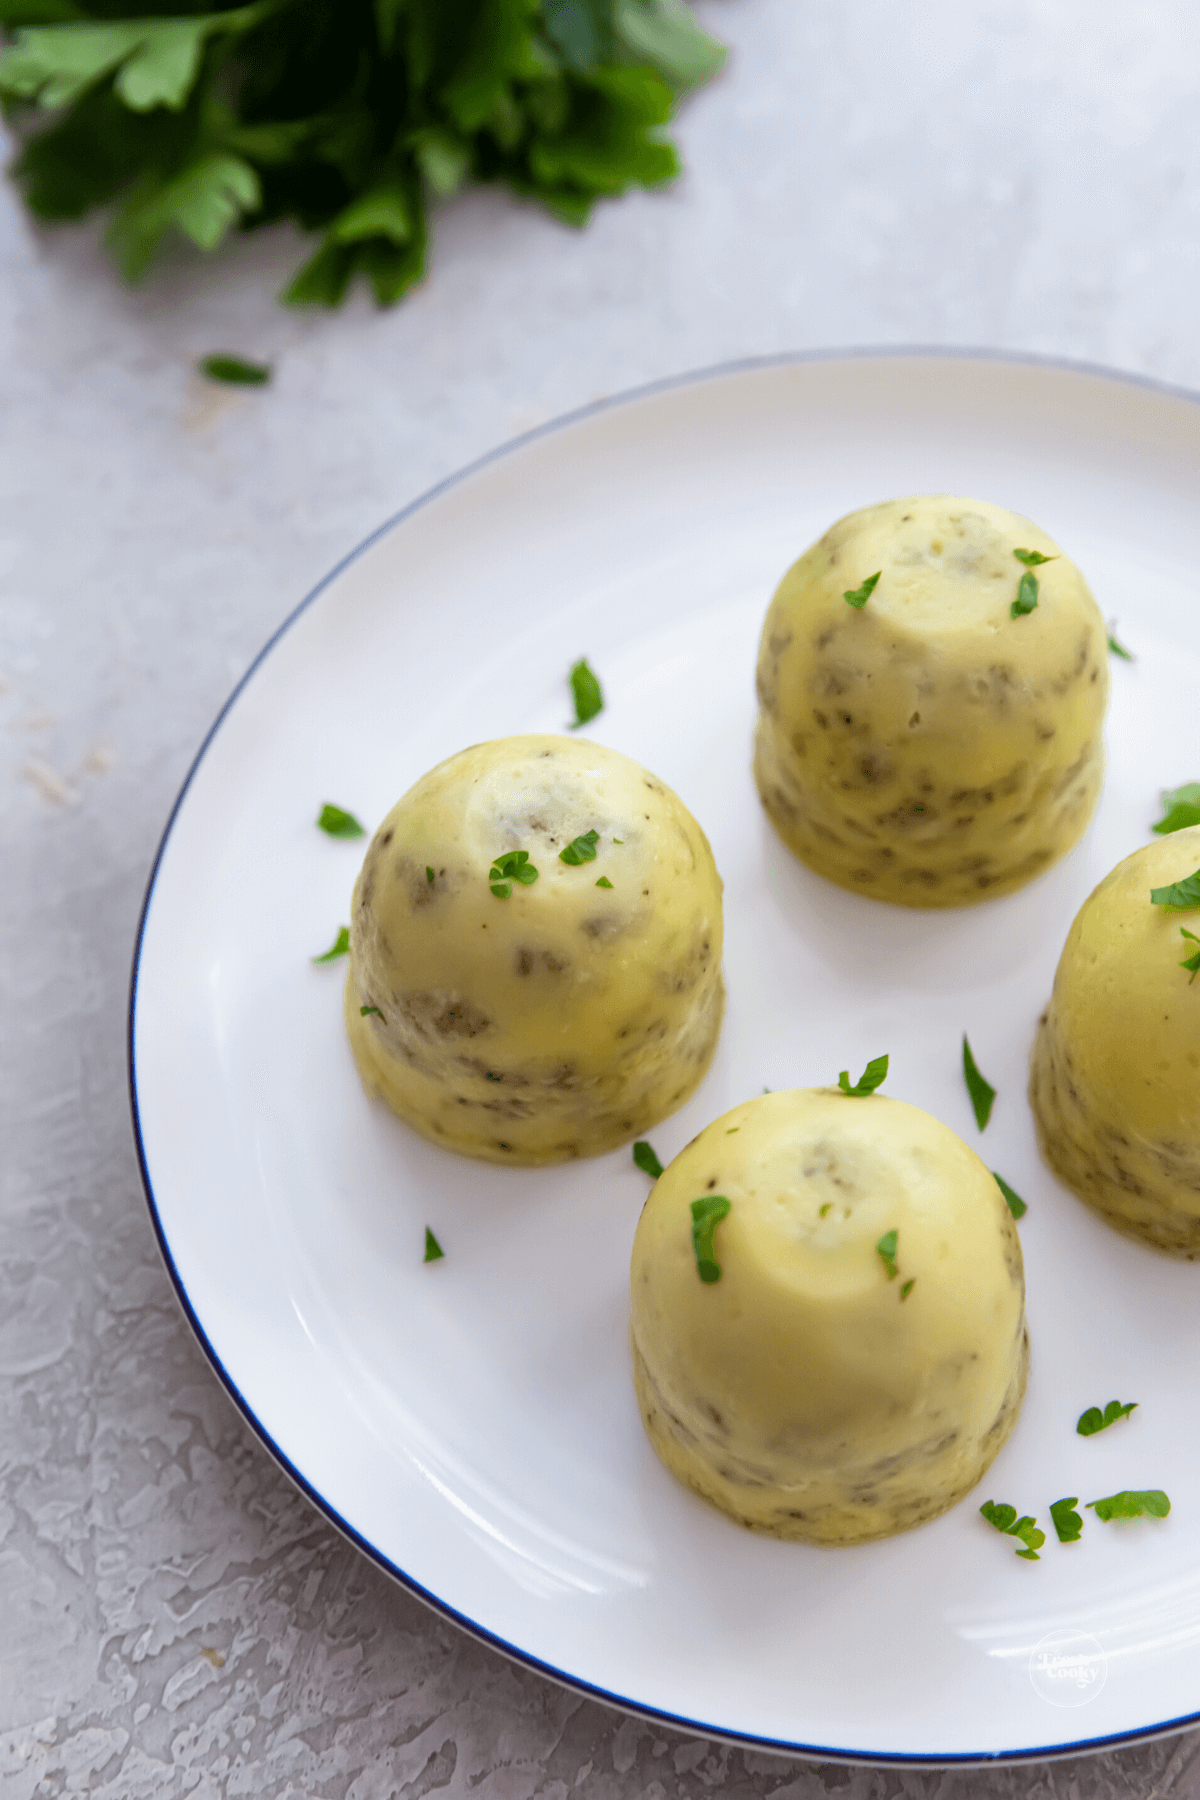 Instant Pot Egg Bites with Sausage and Spinach - Margin Making Mom®